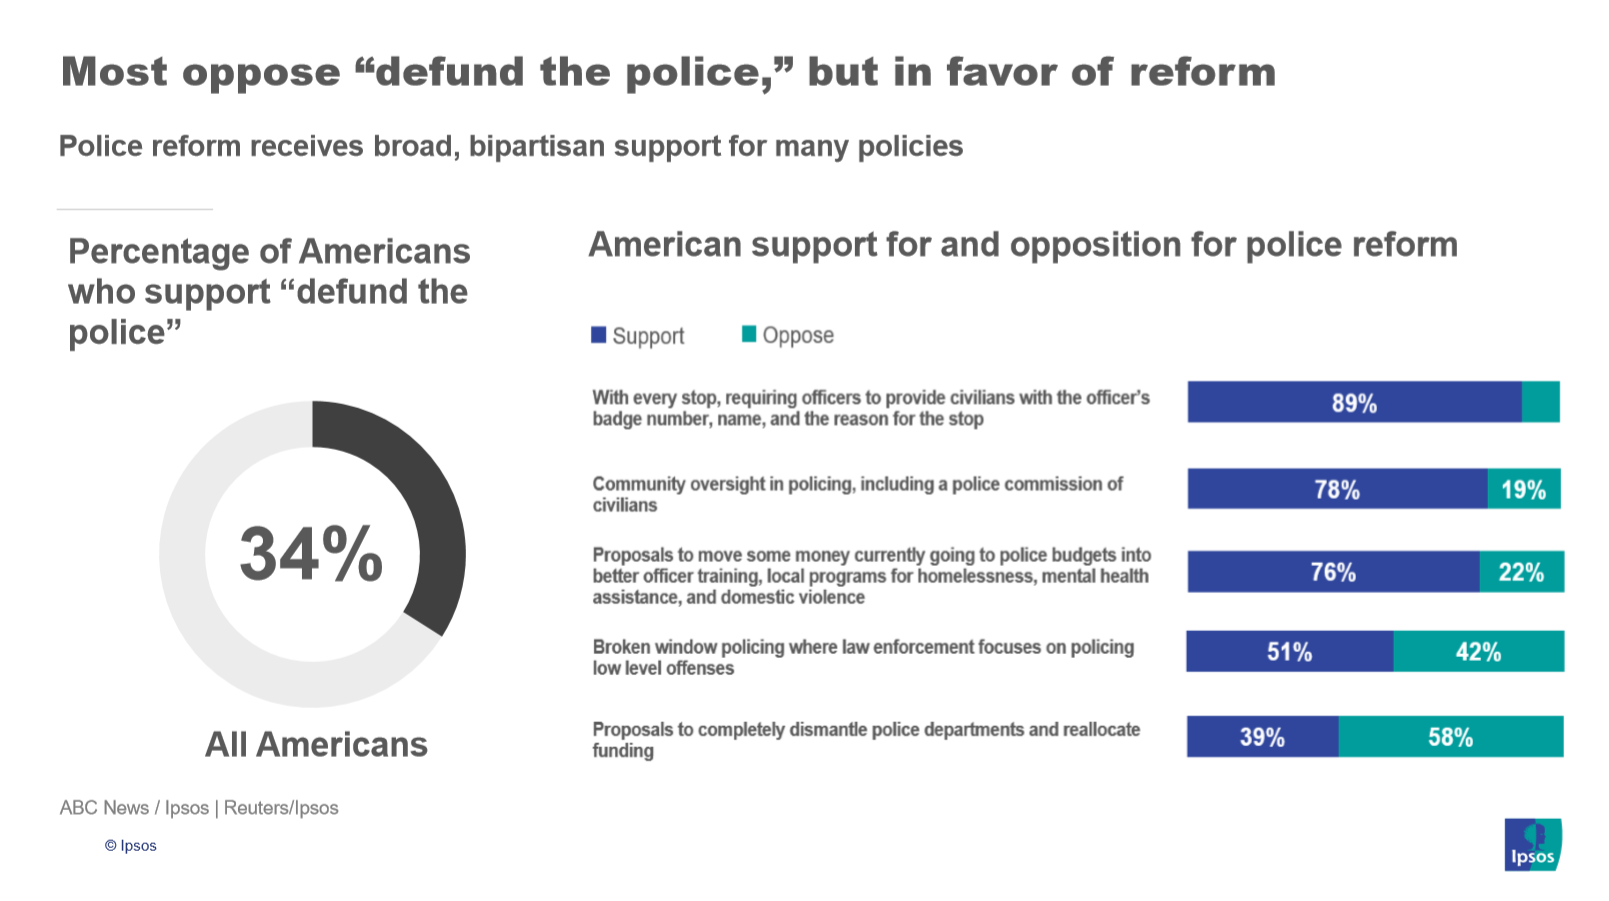 Support for police reform